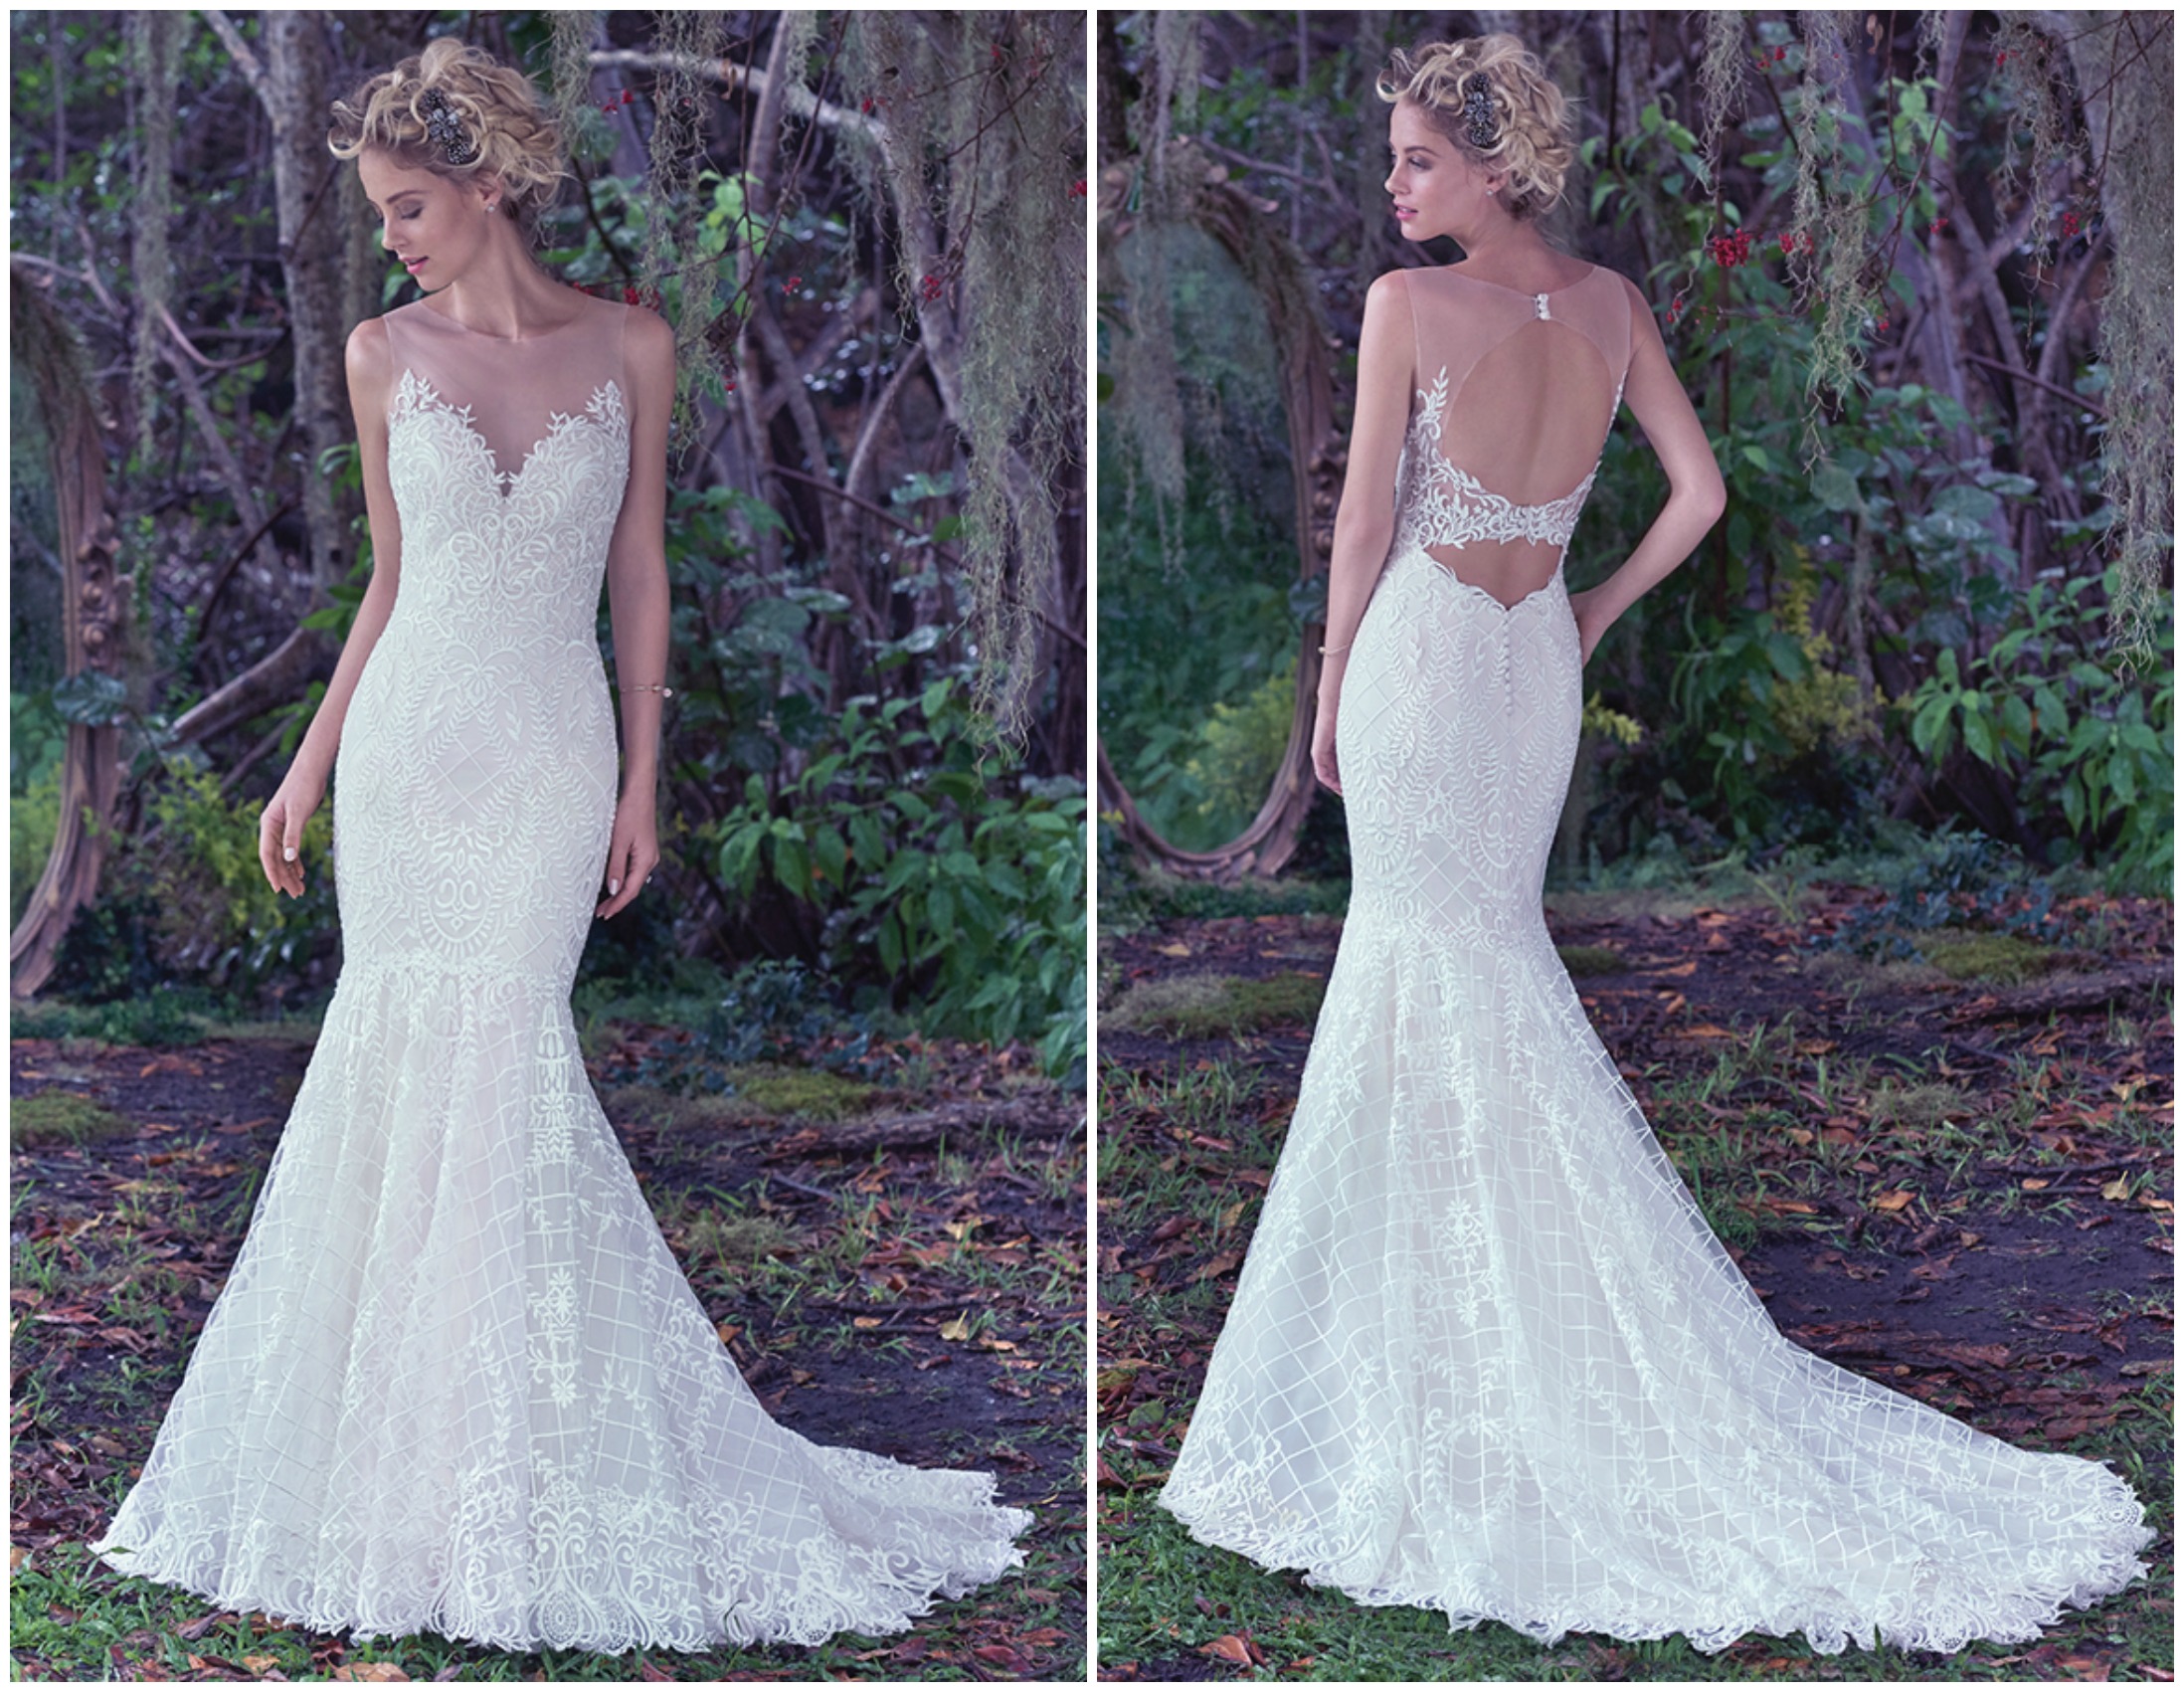 An intricate lattice lace with a double keyhole back and illusion tulle neckline adds a modern twist to this classic fit and flare wedding dress. Finished with covered buttons over zipper closure. 

<a href="https://www.maggiesottero.com/maggie-sottero/analeigh/9728" target="_blank">Maggie Sottero</a>